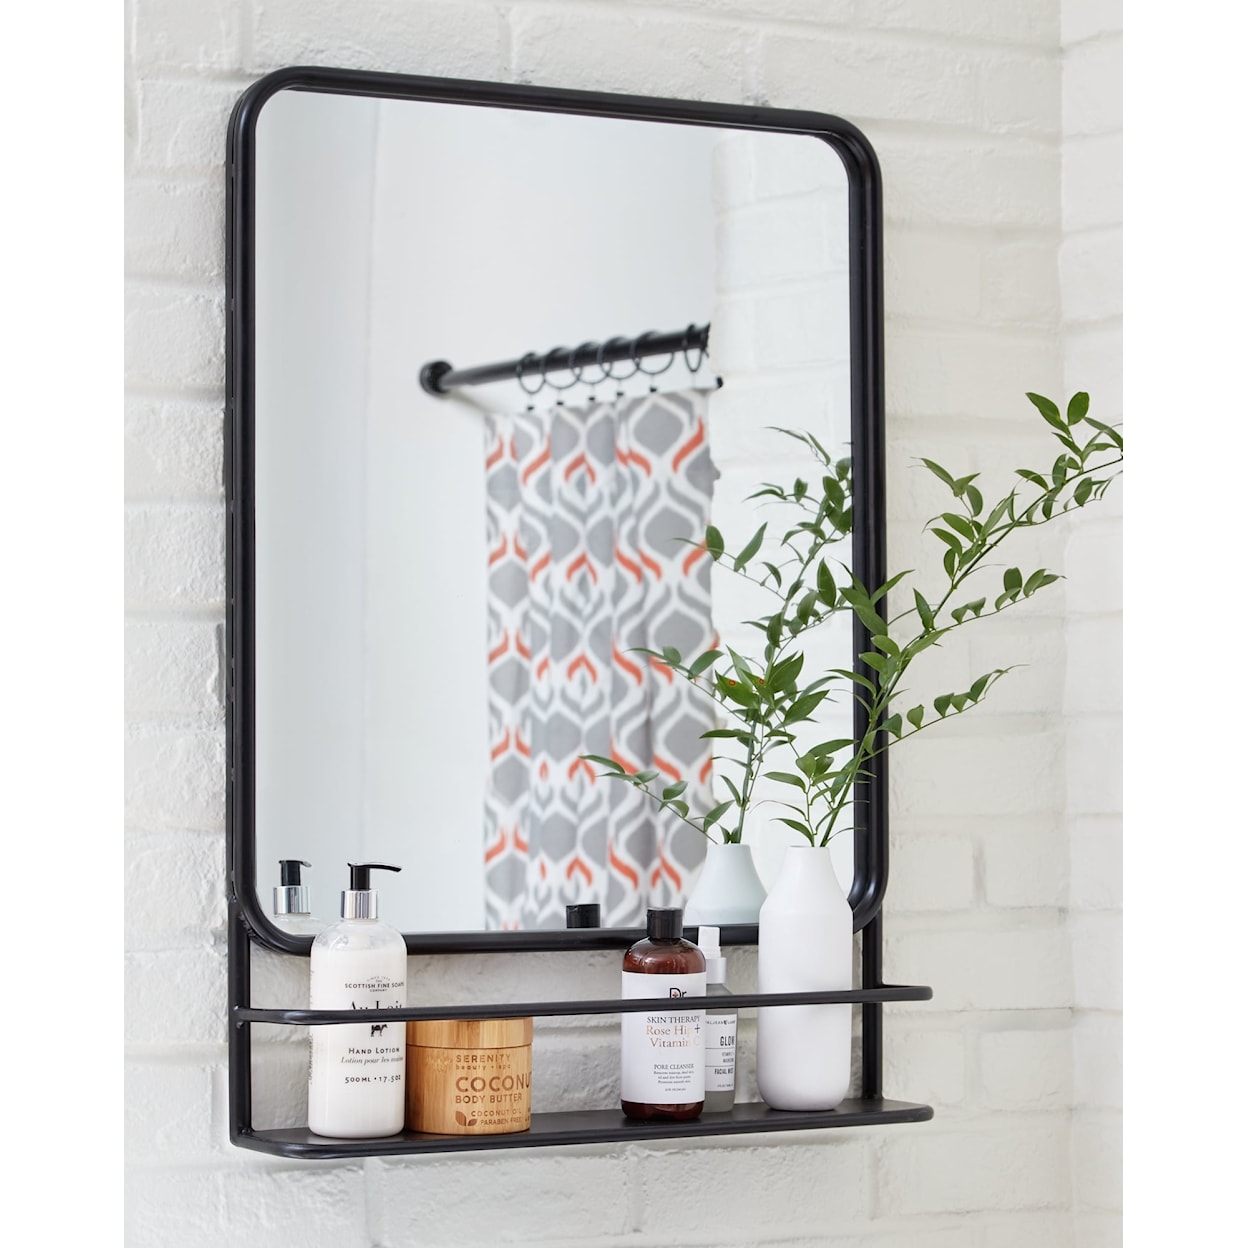 Michael Alan Select Ebba Accent Mirror